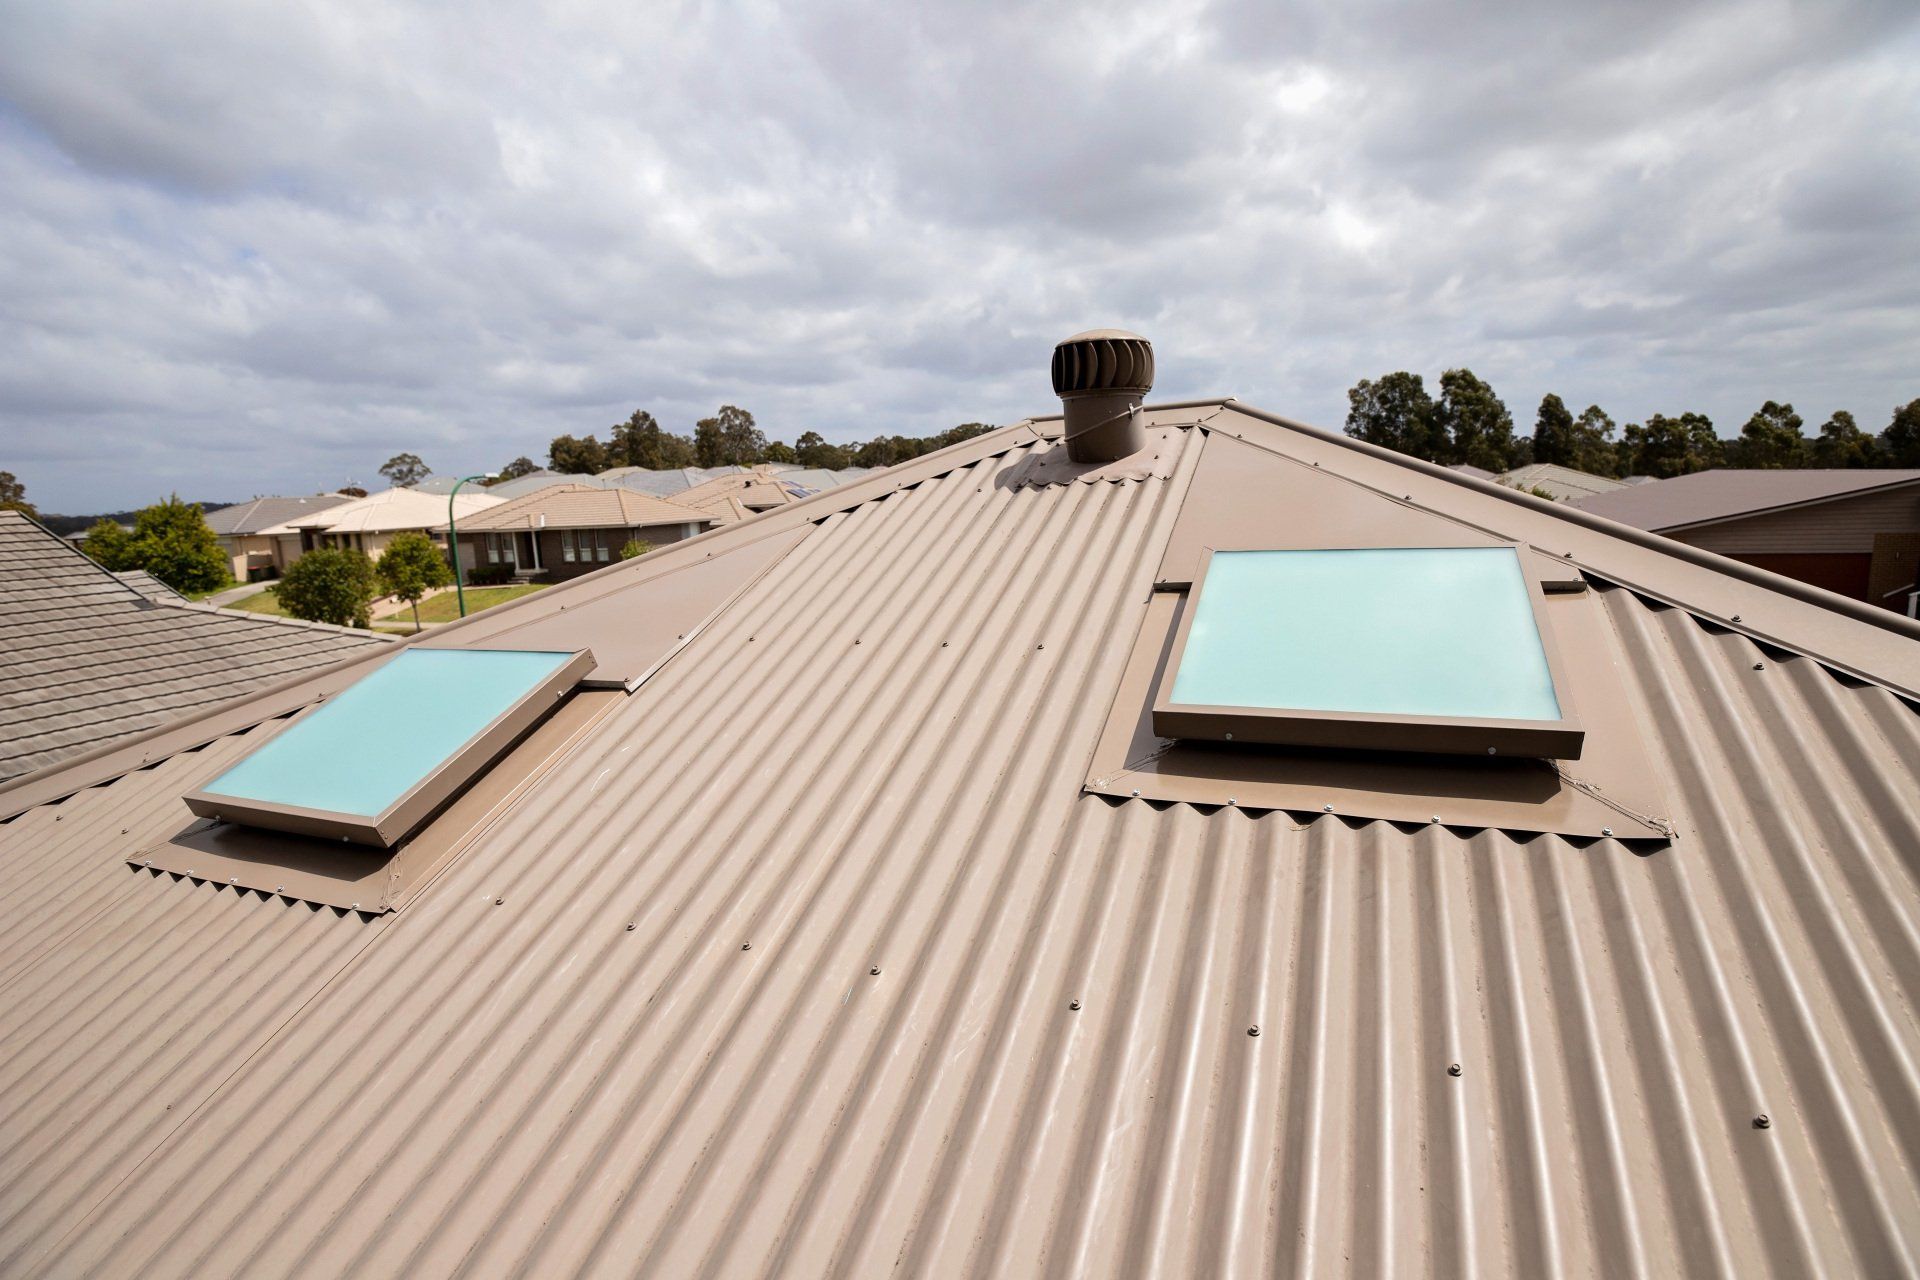 The Roof of A House Has Two Skylights on It  — New Blinds and Shutters in Maryland, NSW